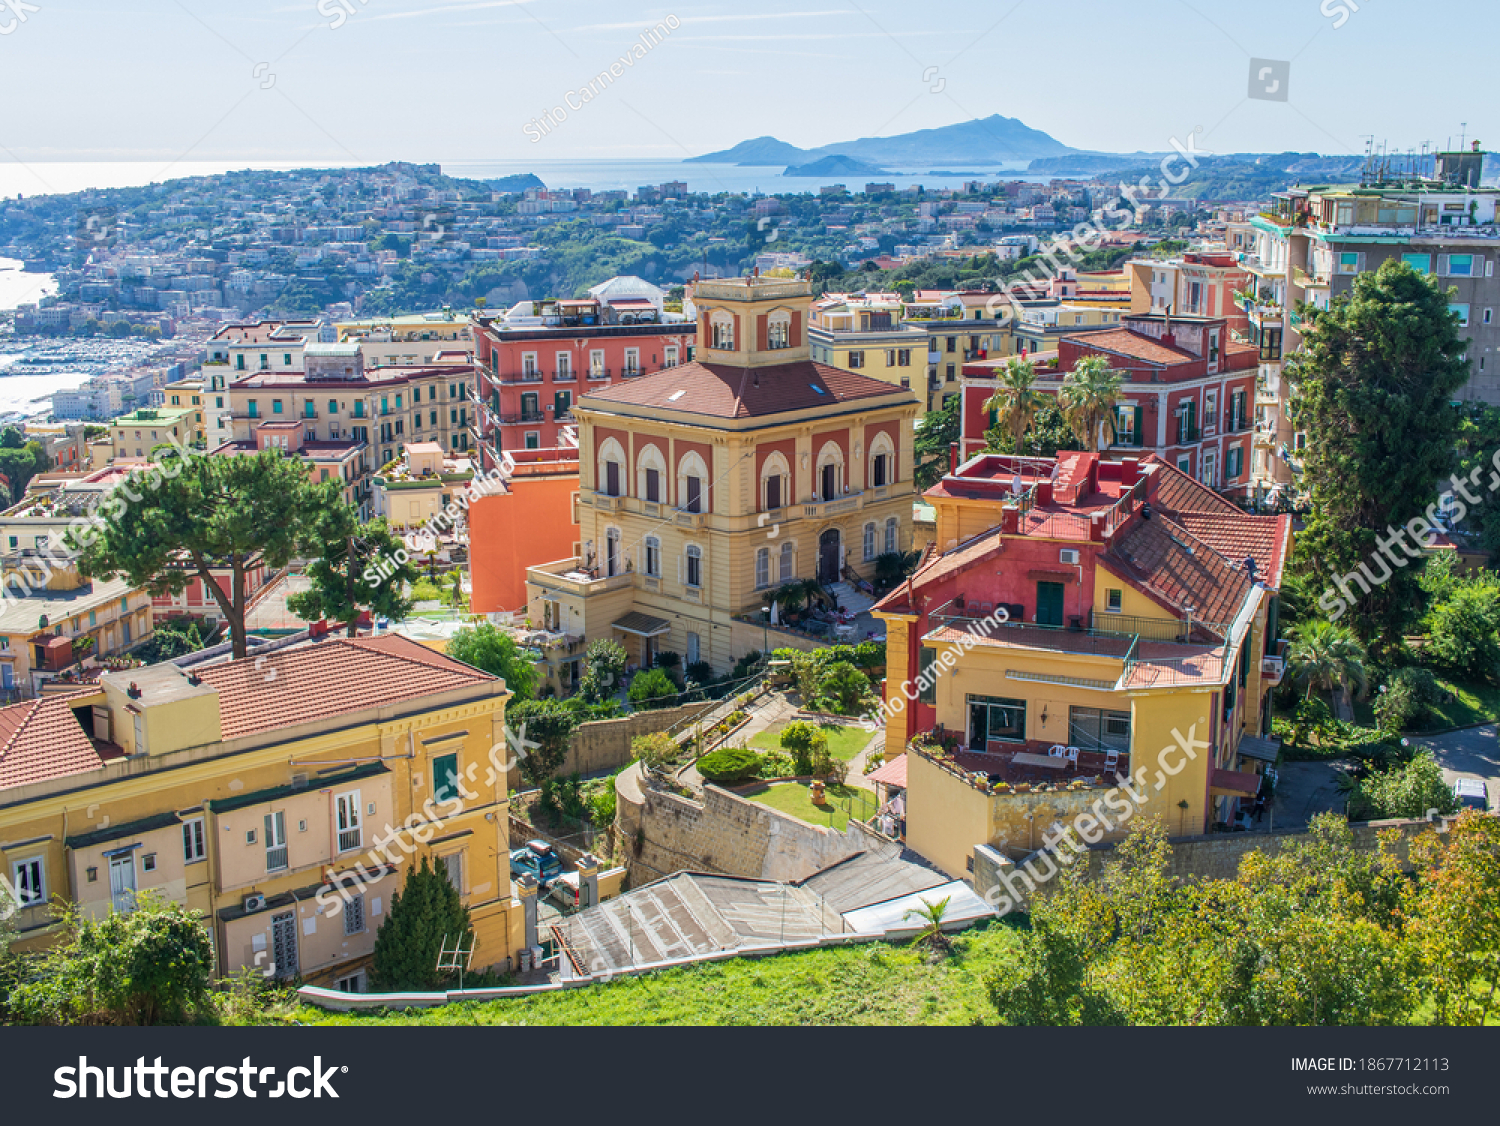 Naples, Italy - one of the historical districts in Naples, Chiaia displays a wonderful architecture and luxury residences. Here the district seen from the Certosa fortress #1867712113